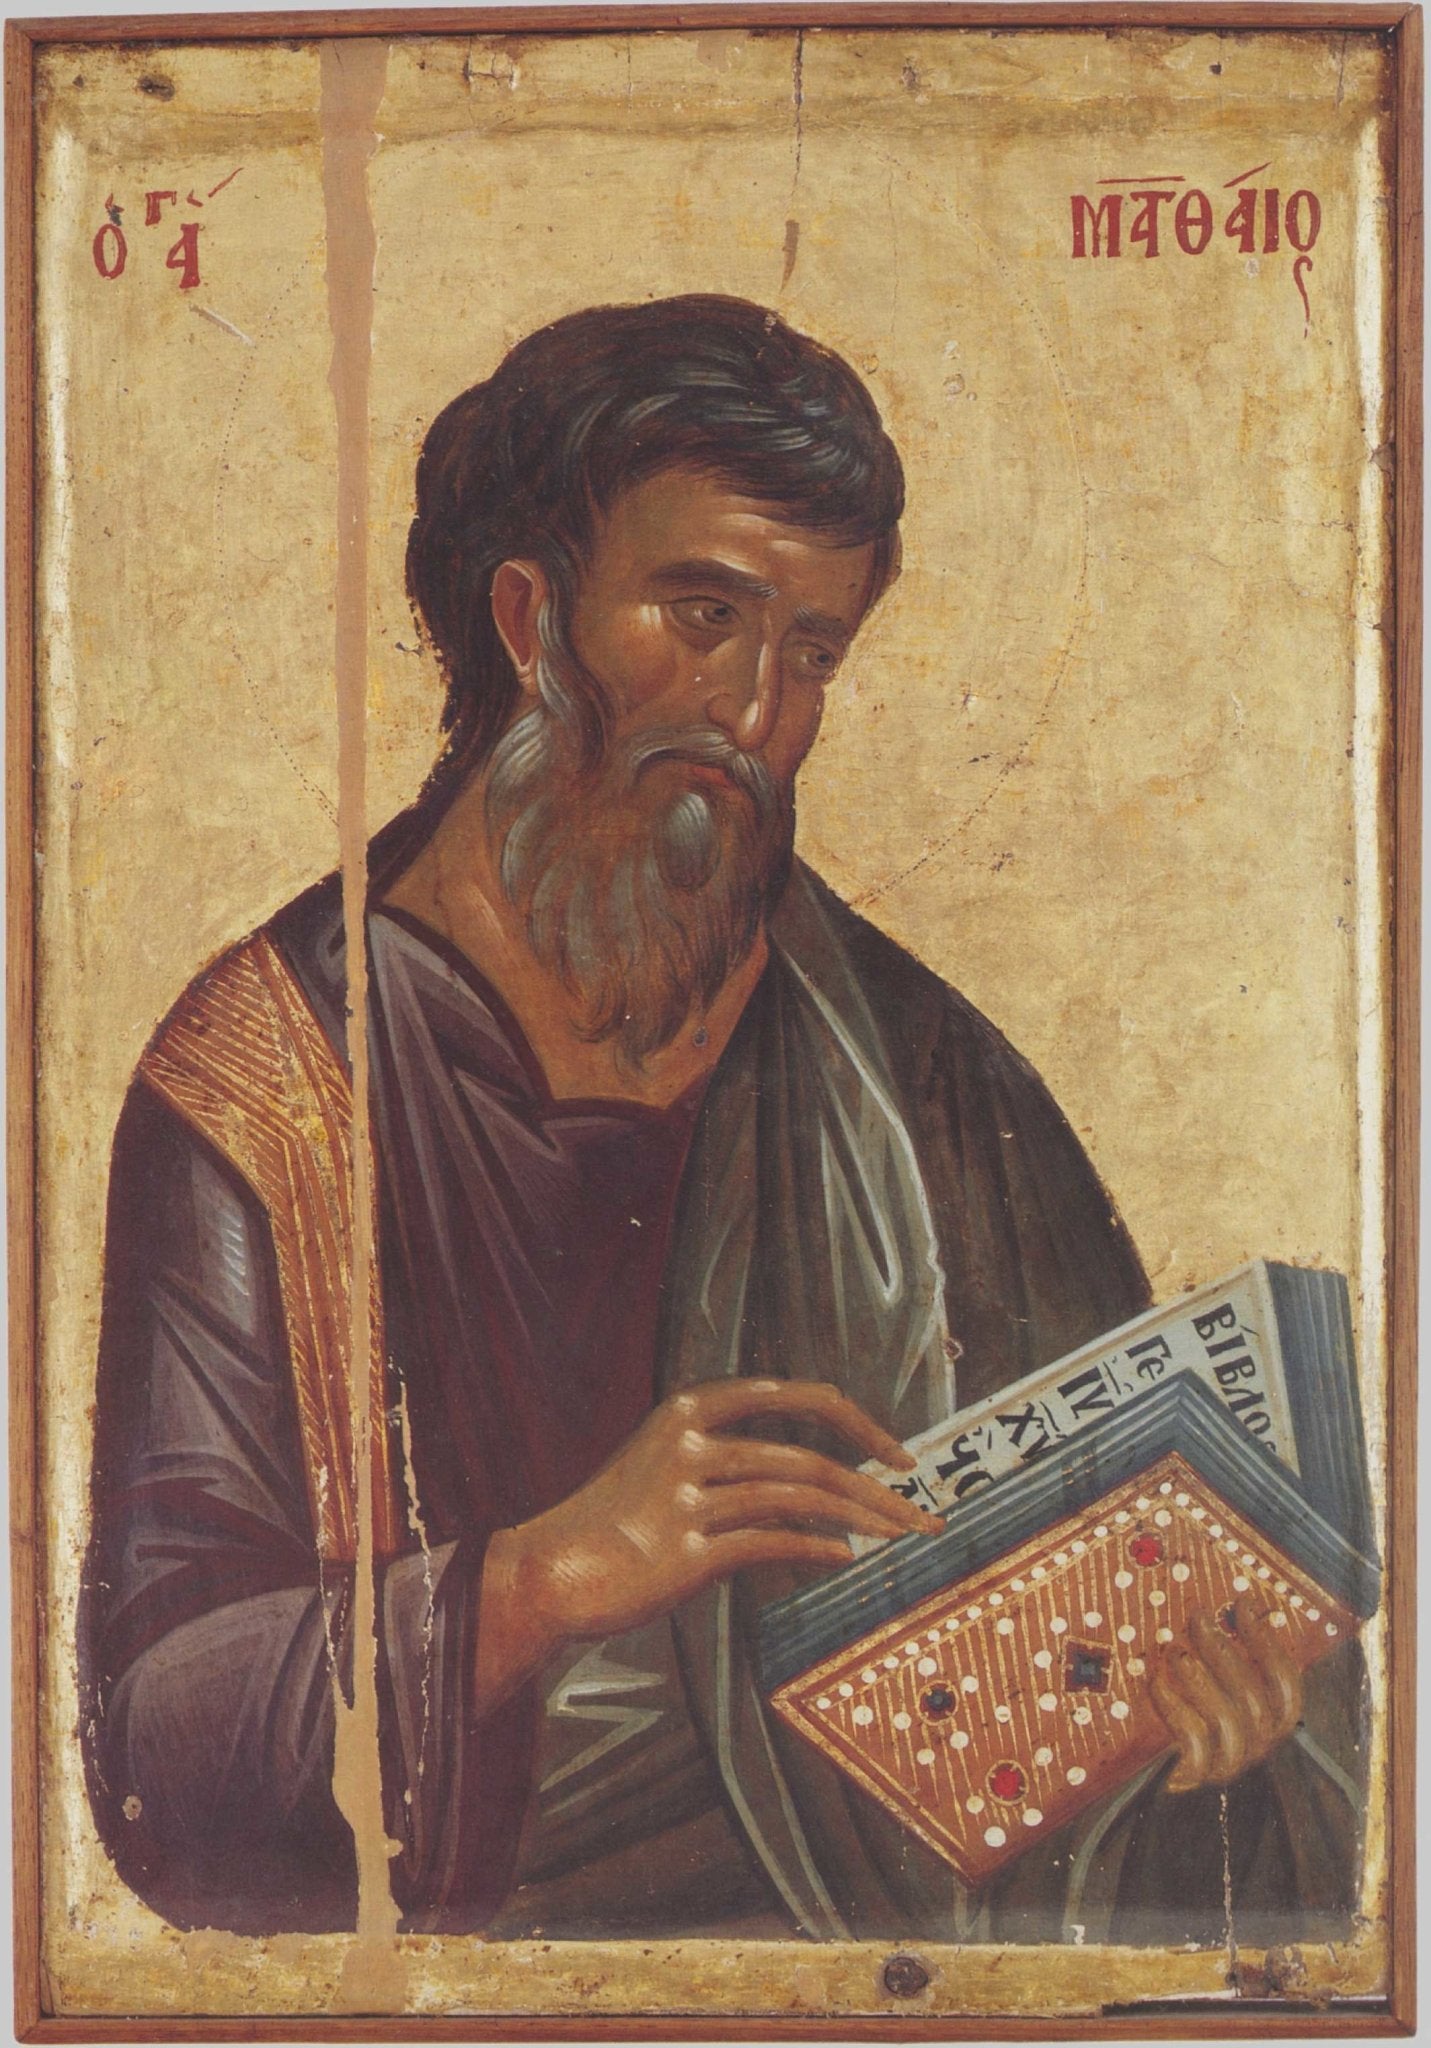 On the Apostolic Life - A Homily on the Feast of the Evangelist Matthew (2020)